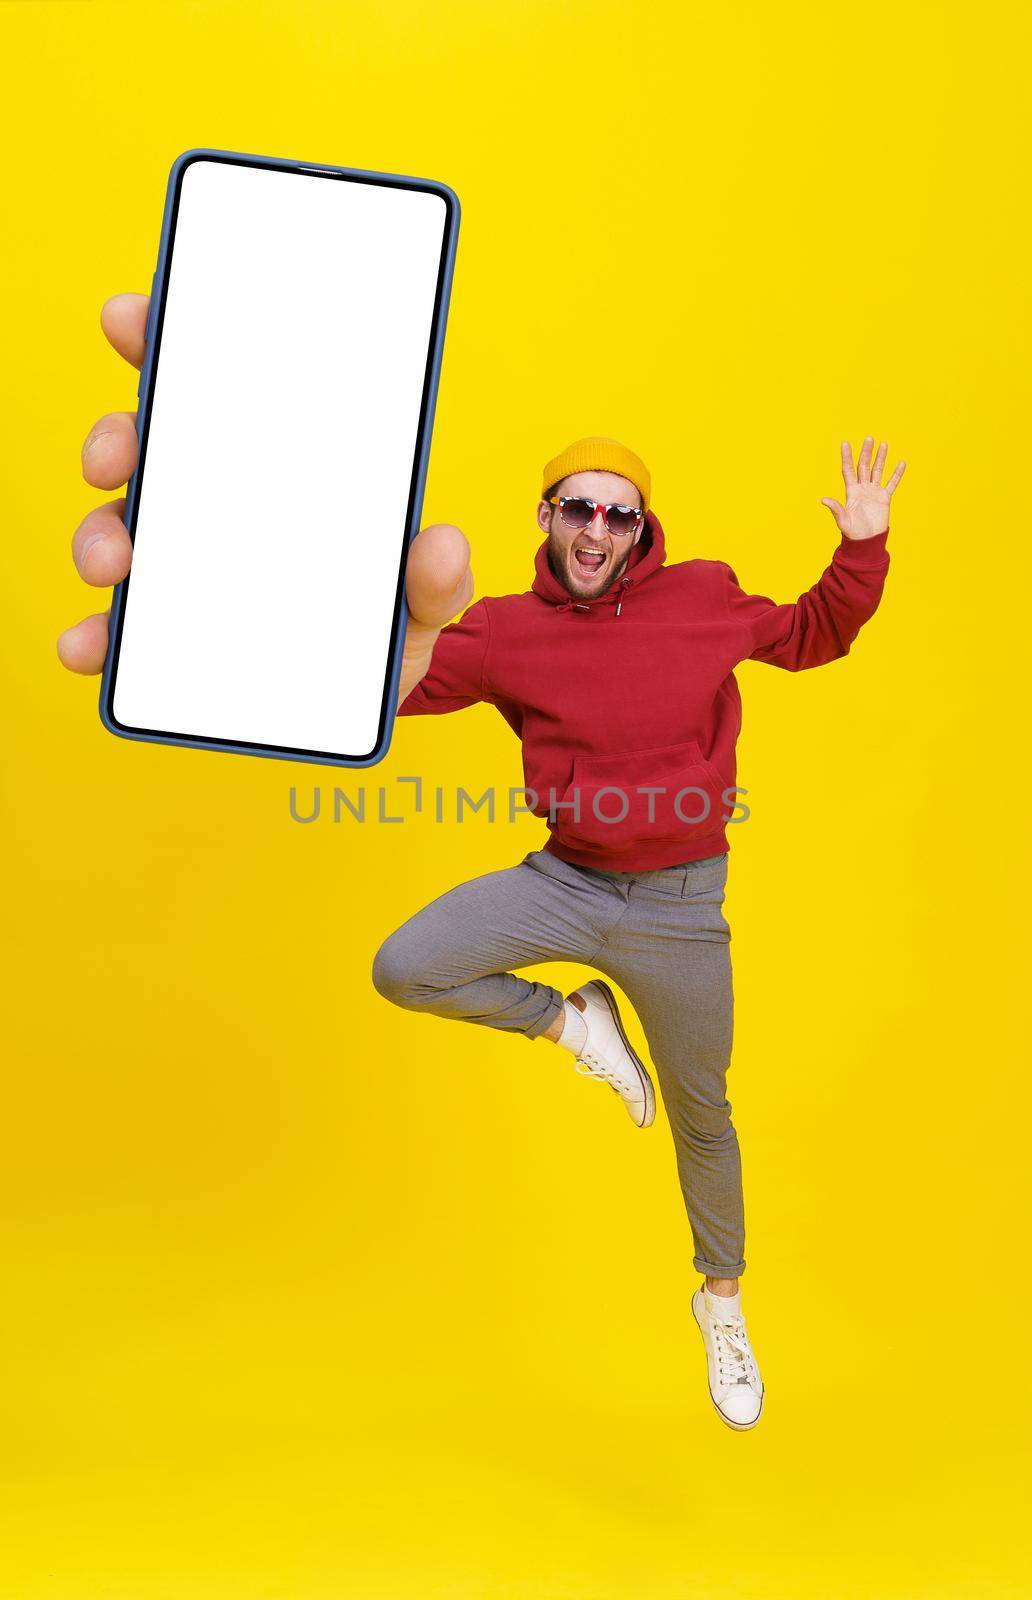 Young man in Uk flag sunglasses jumping in joy like ballet dancer holding smartphone wearing casual red hoodie and jeans isolated on yellow background. Mobile app advertising product placement.